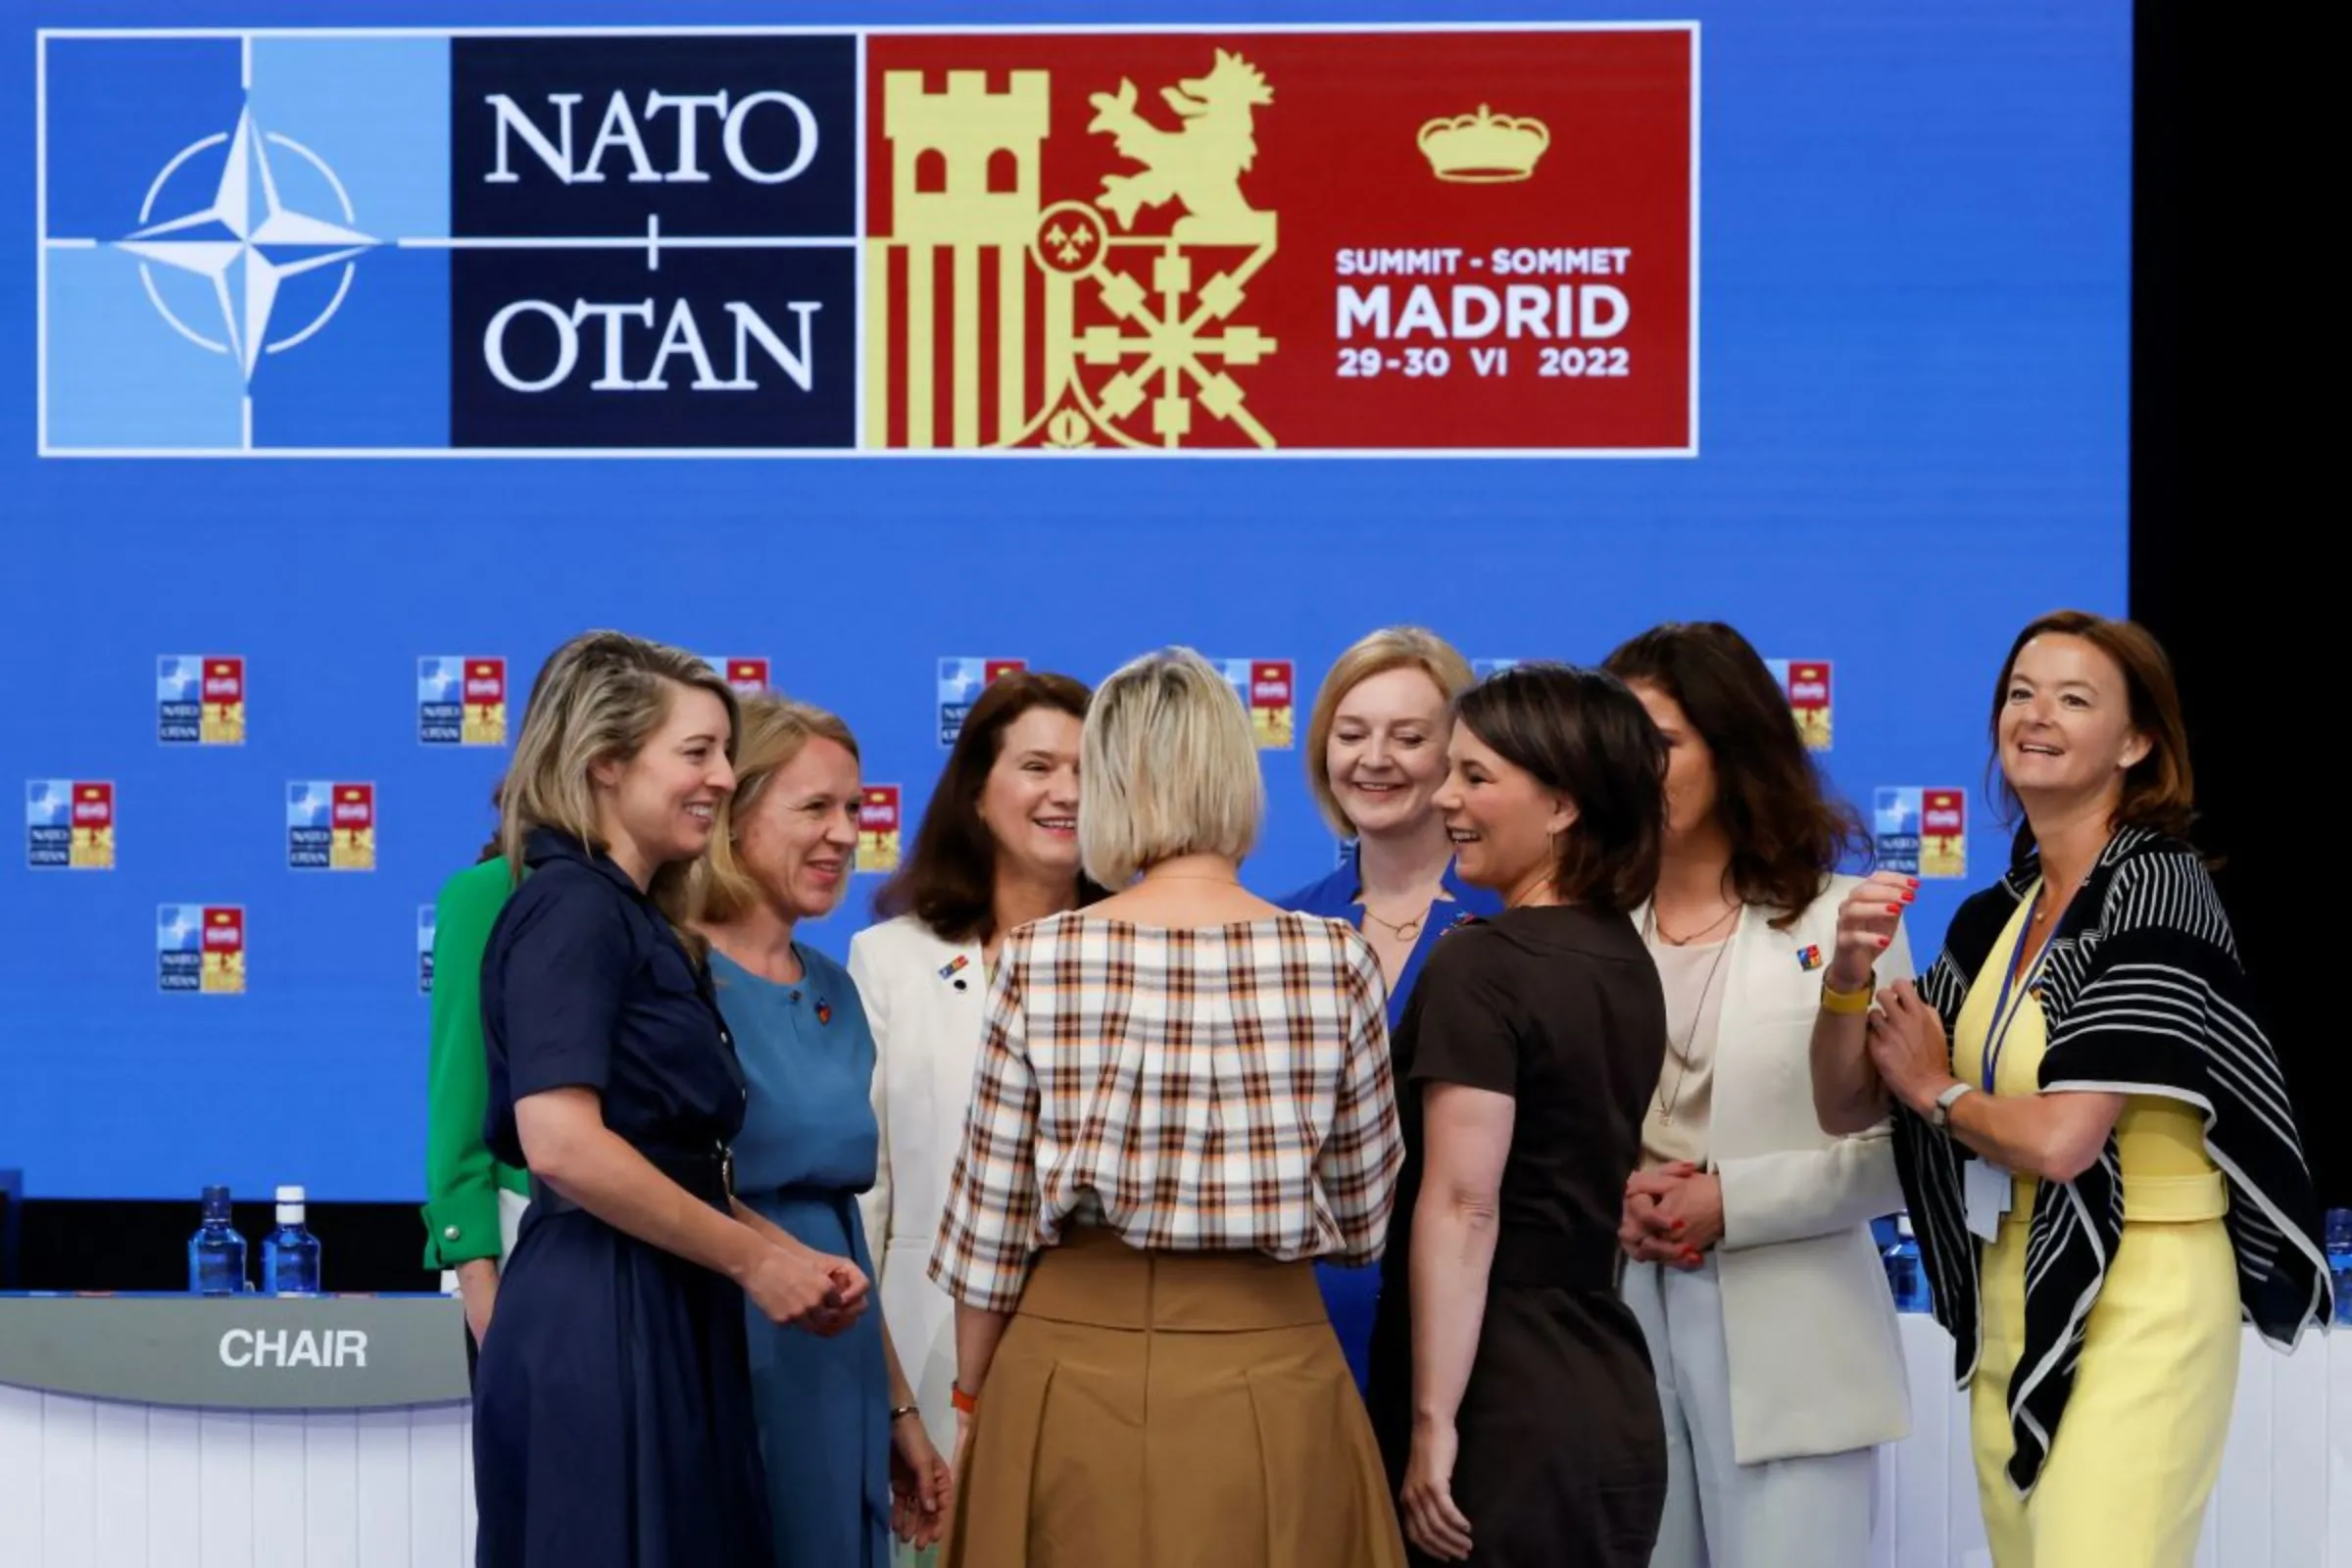 Women ministers and politicians from Europe and Canada attend a discussion during a NATO summit in Madrid, Spain June 29, 2022. REUTERS/Yves Herman